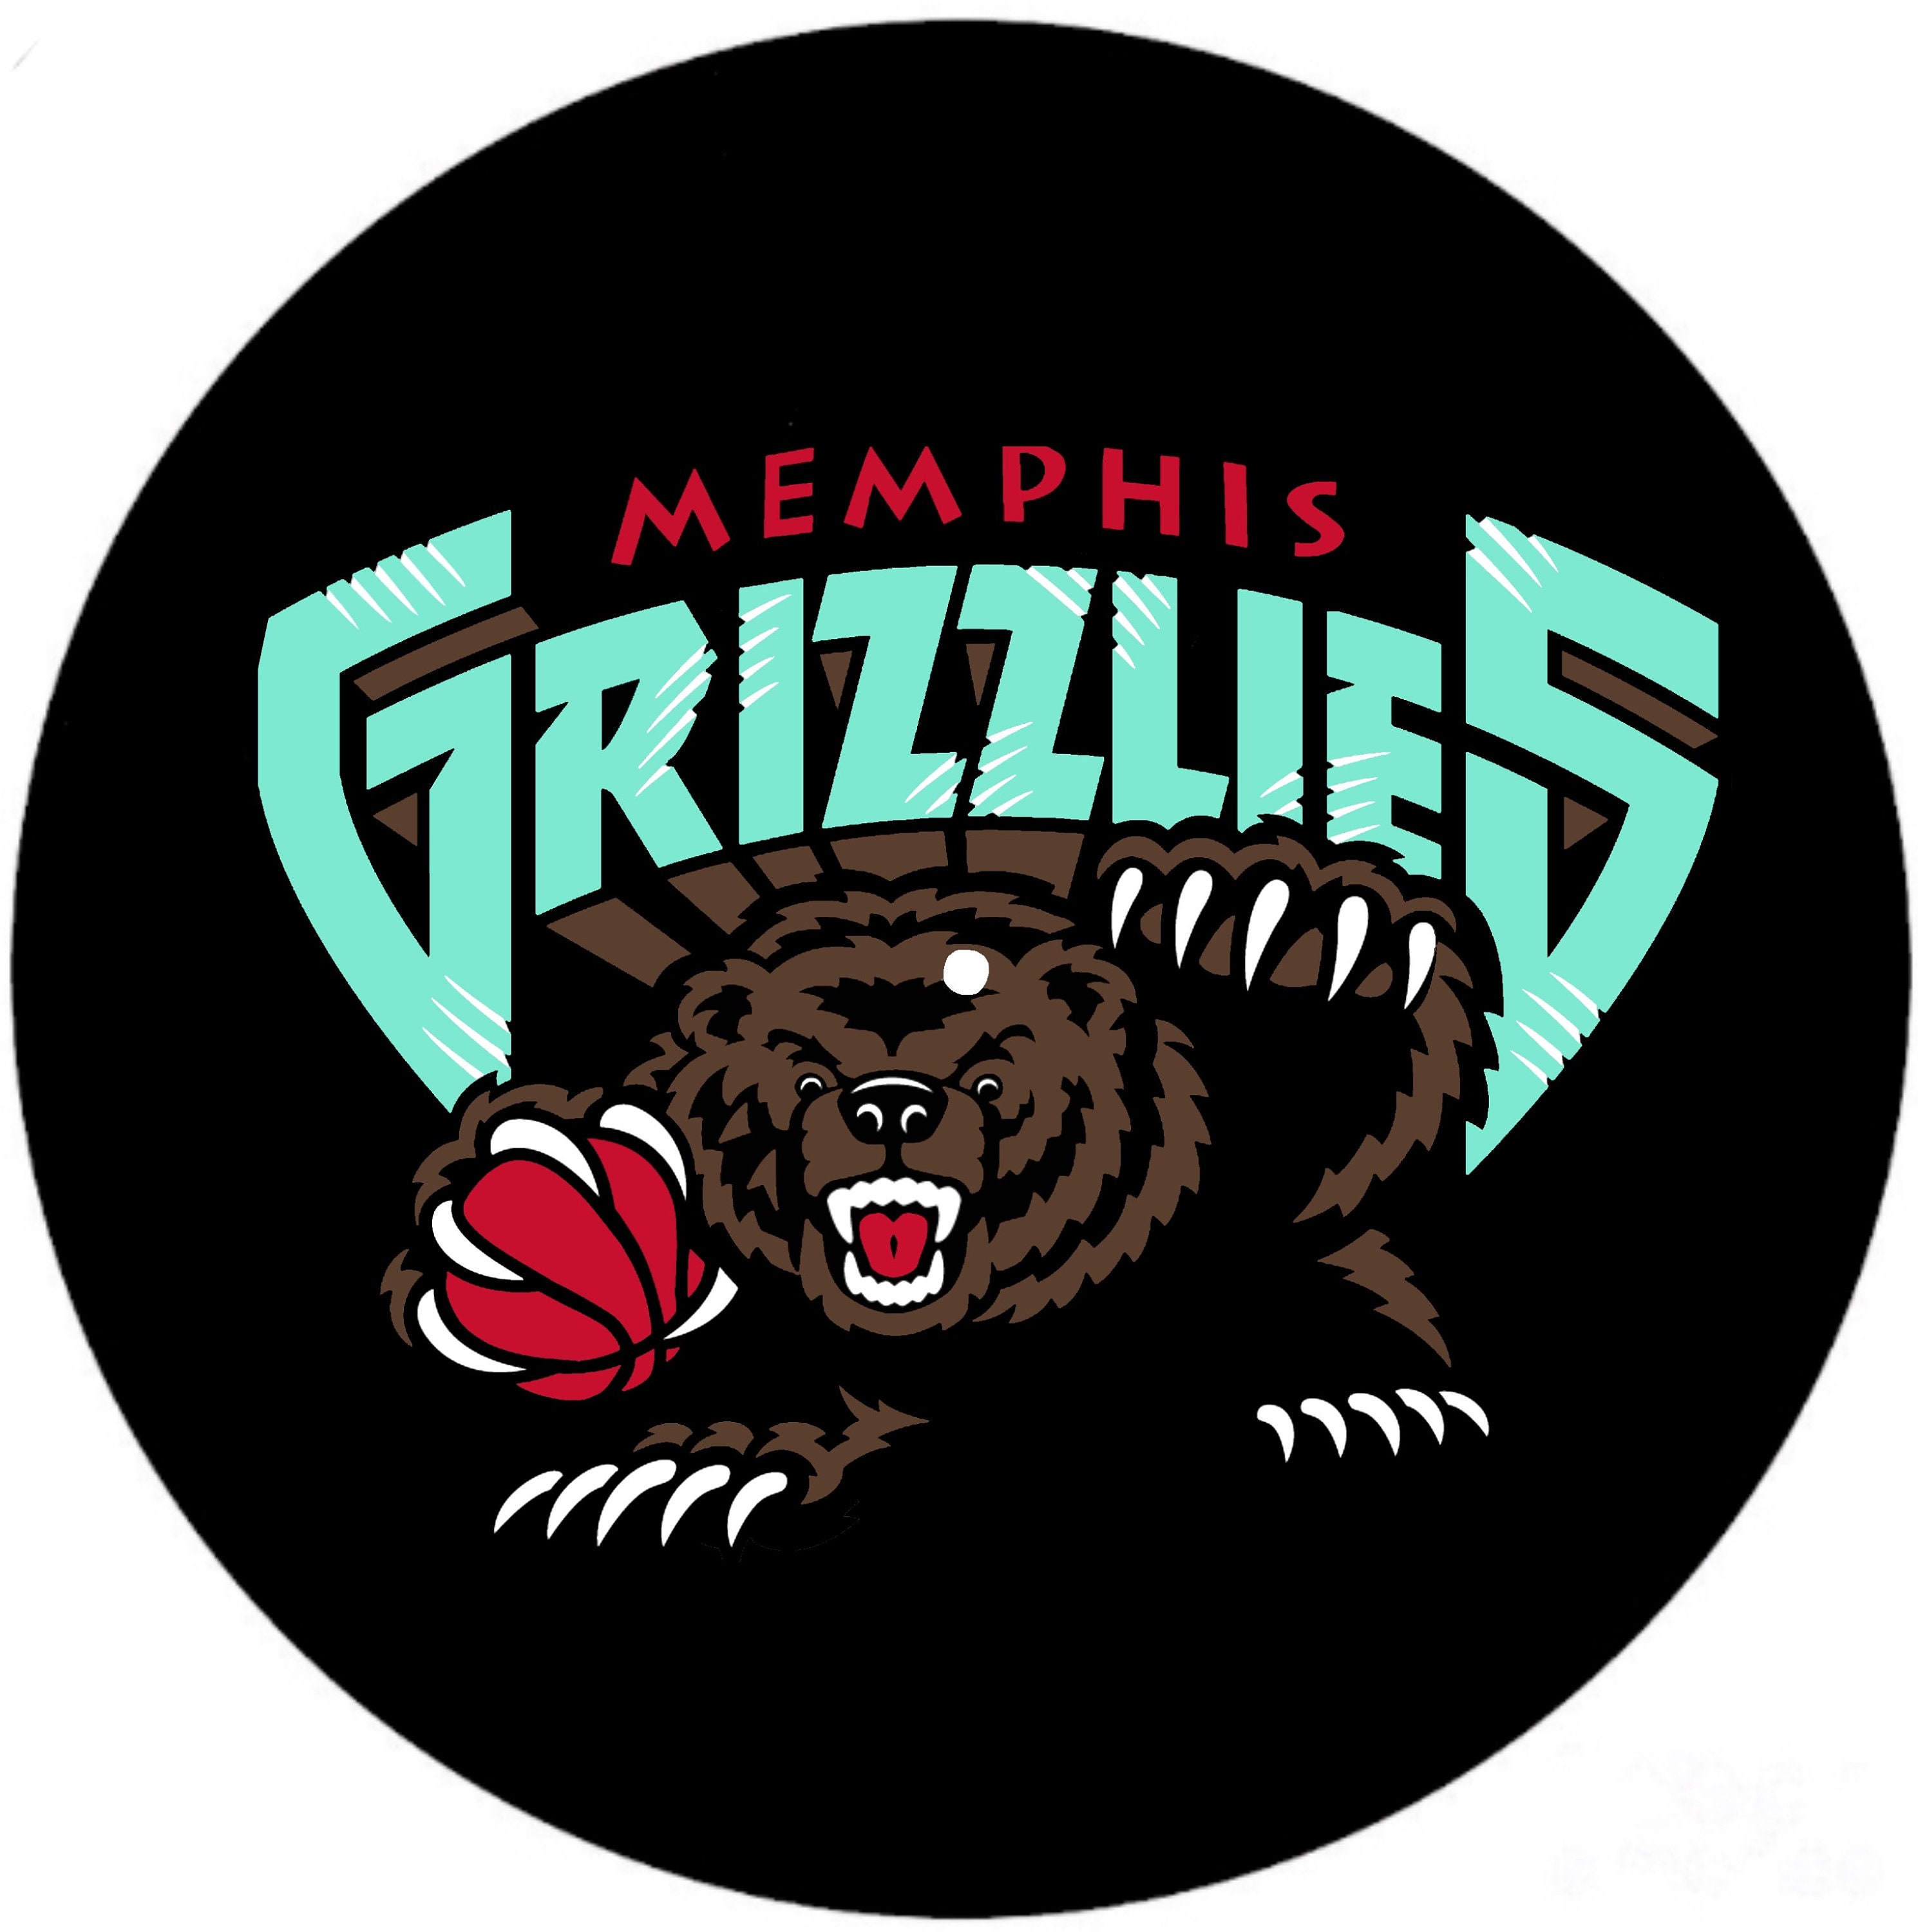 Do the Memphis Grizzlies have the best retro logo in all of sports?